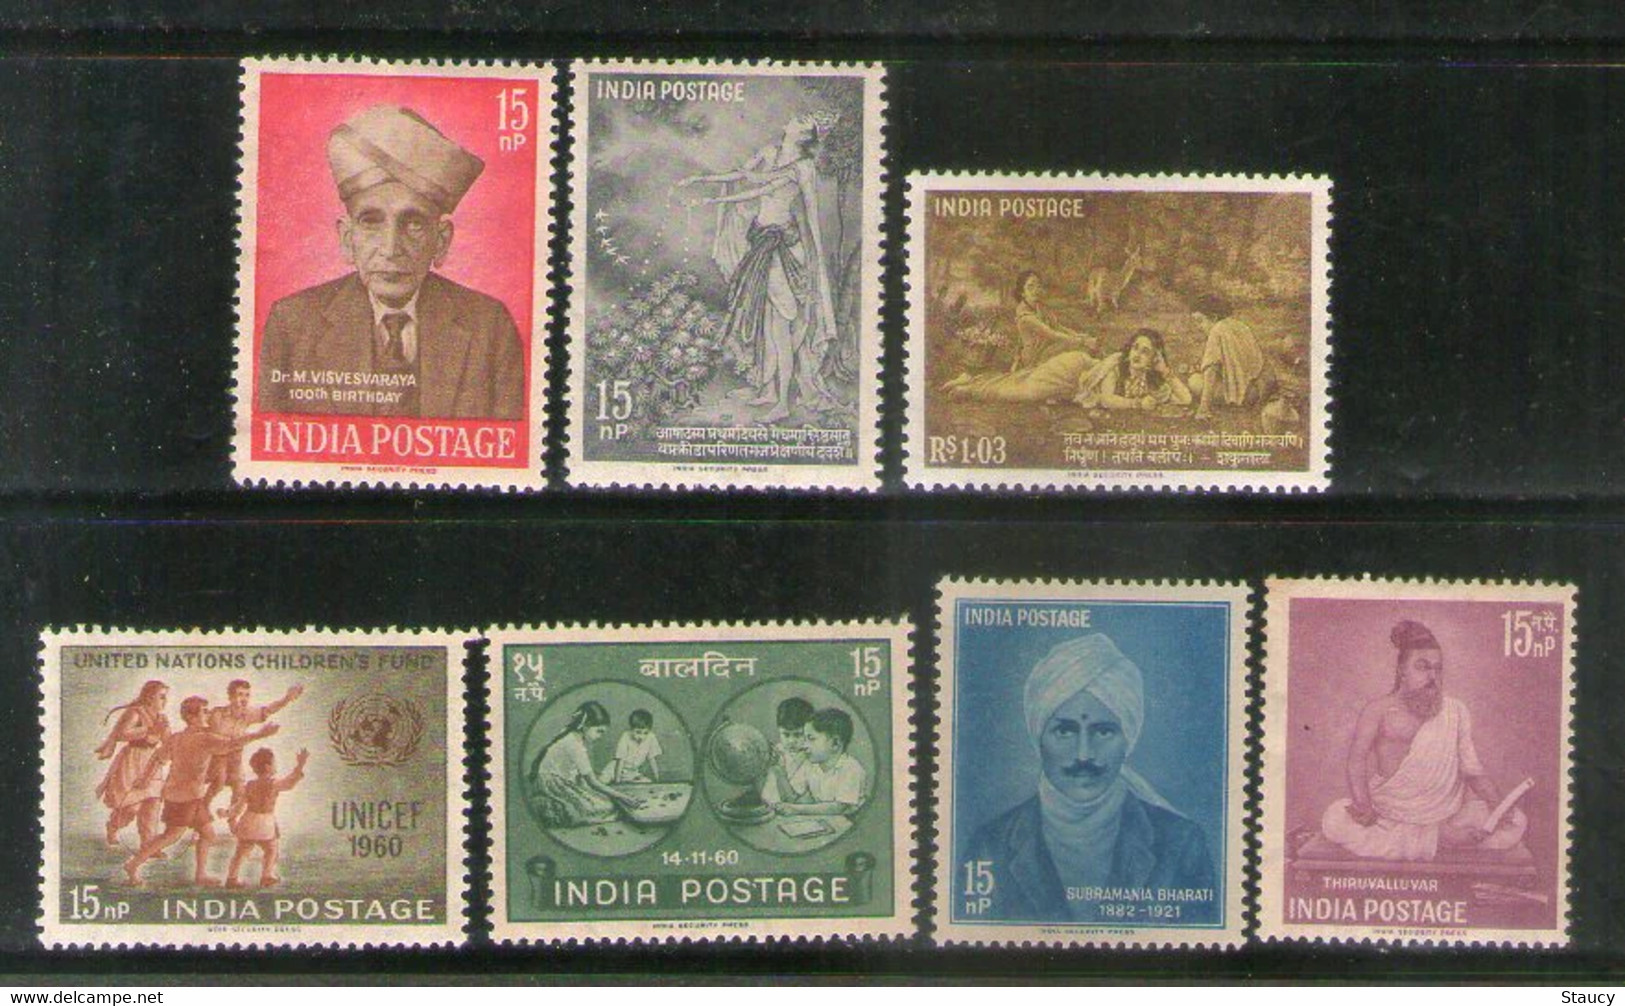 India 1960 Complete Year Pack / Set / Collection Total 7 Stamps (No Missing) MNH As Per Scan - Annate Complete